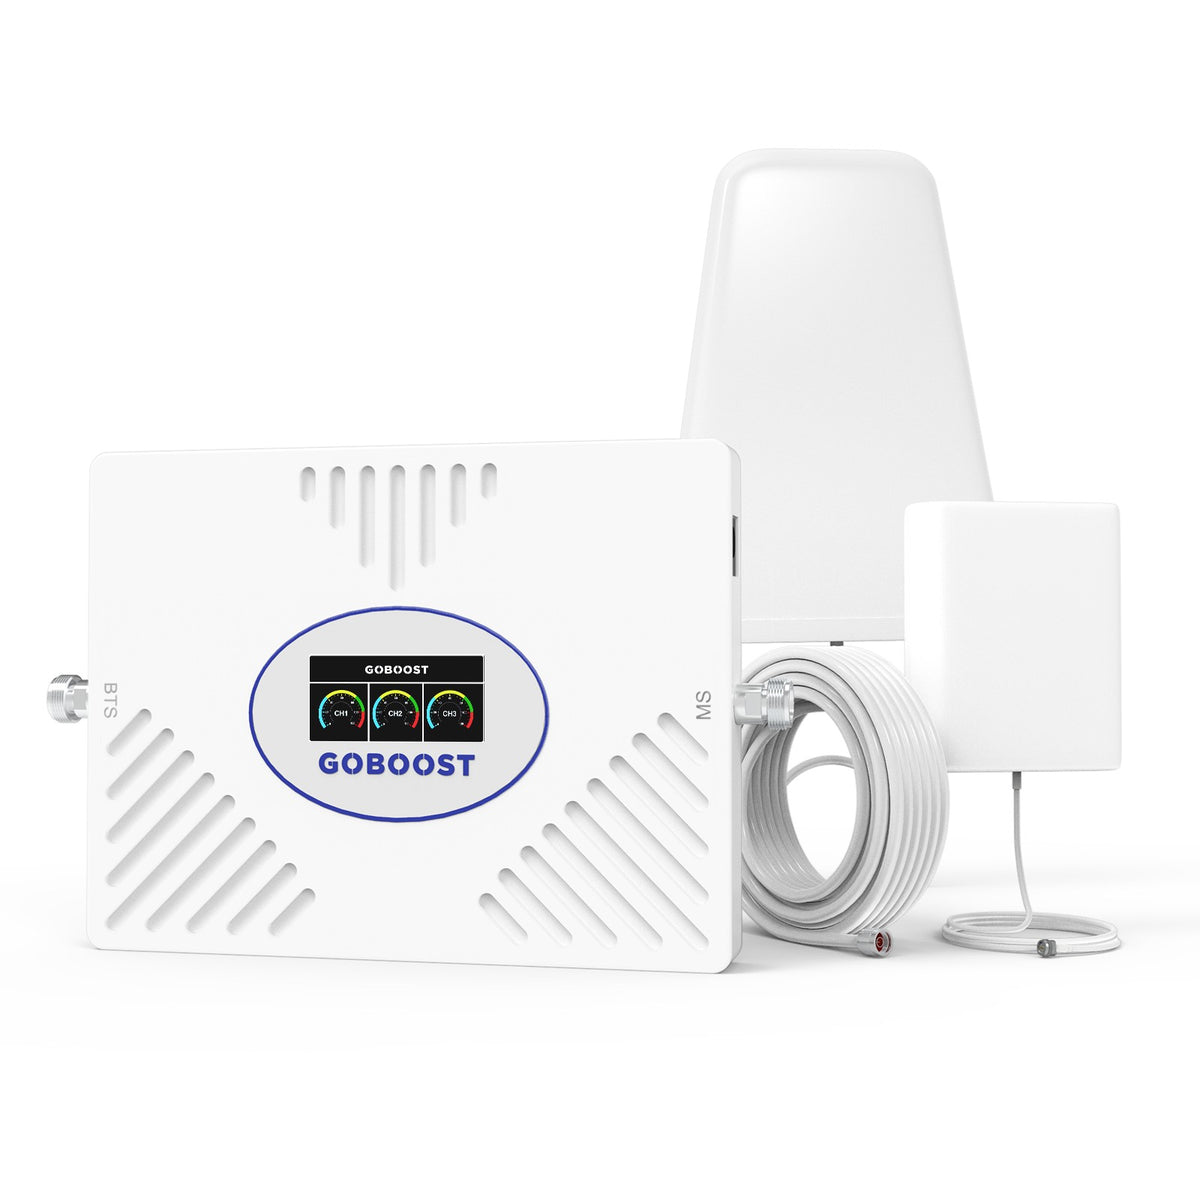 GOBOOST Signal Booster Work on Band2&4&5 With LPDA Antennna